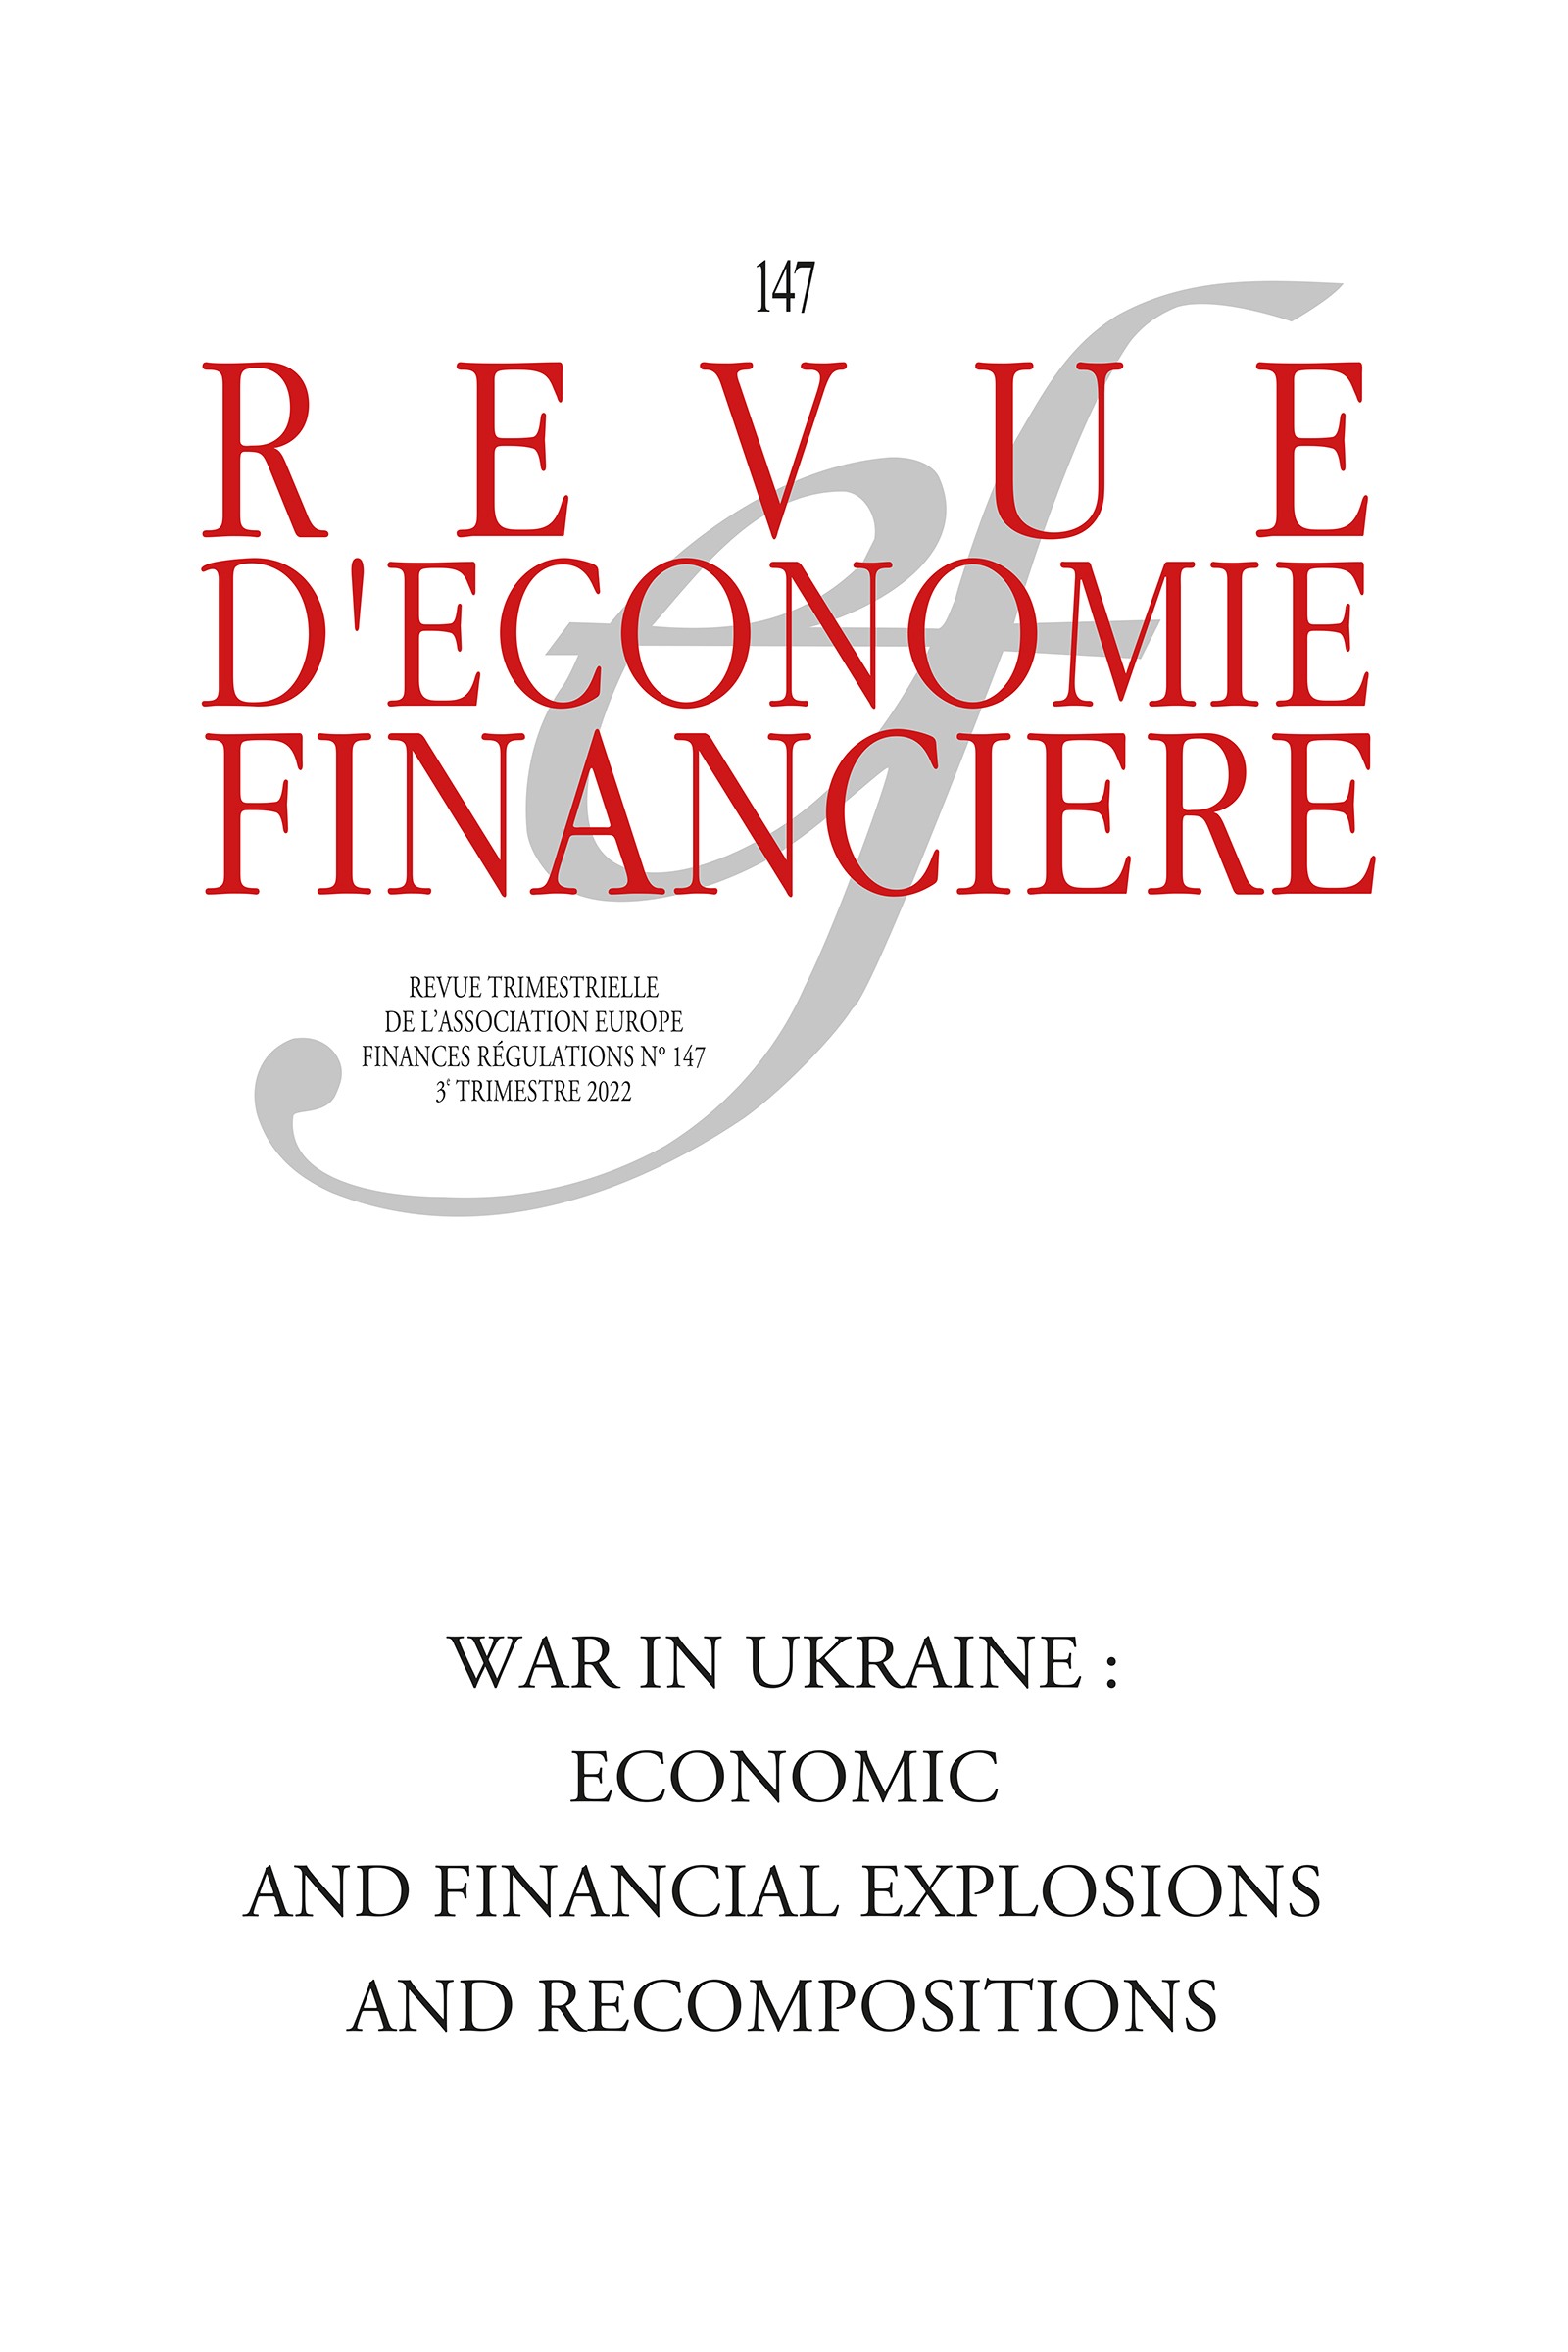 War in Ukraine: Economic and Financial Explosions and Recompositions